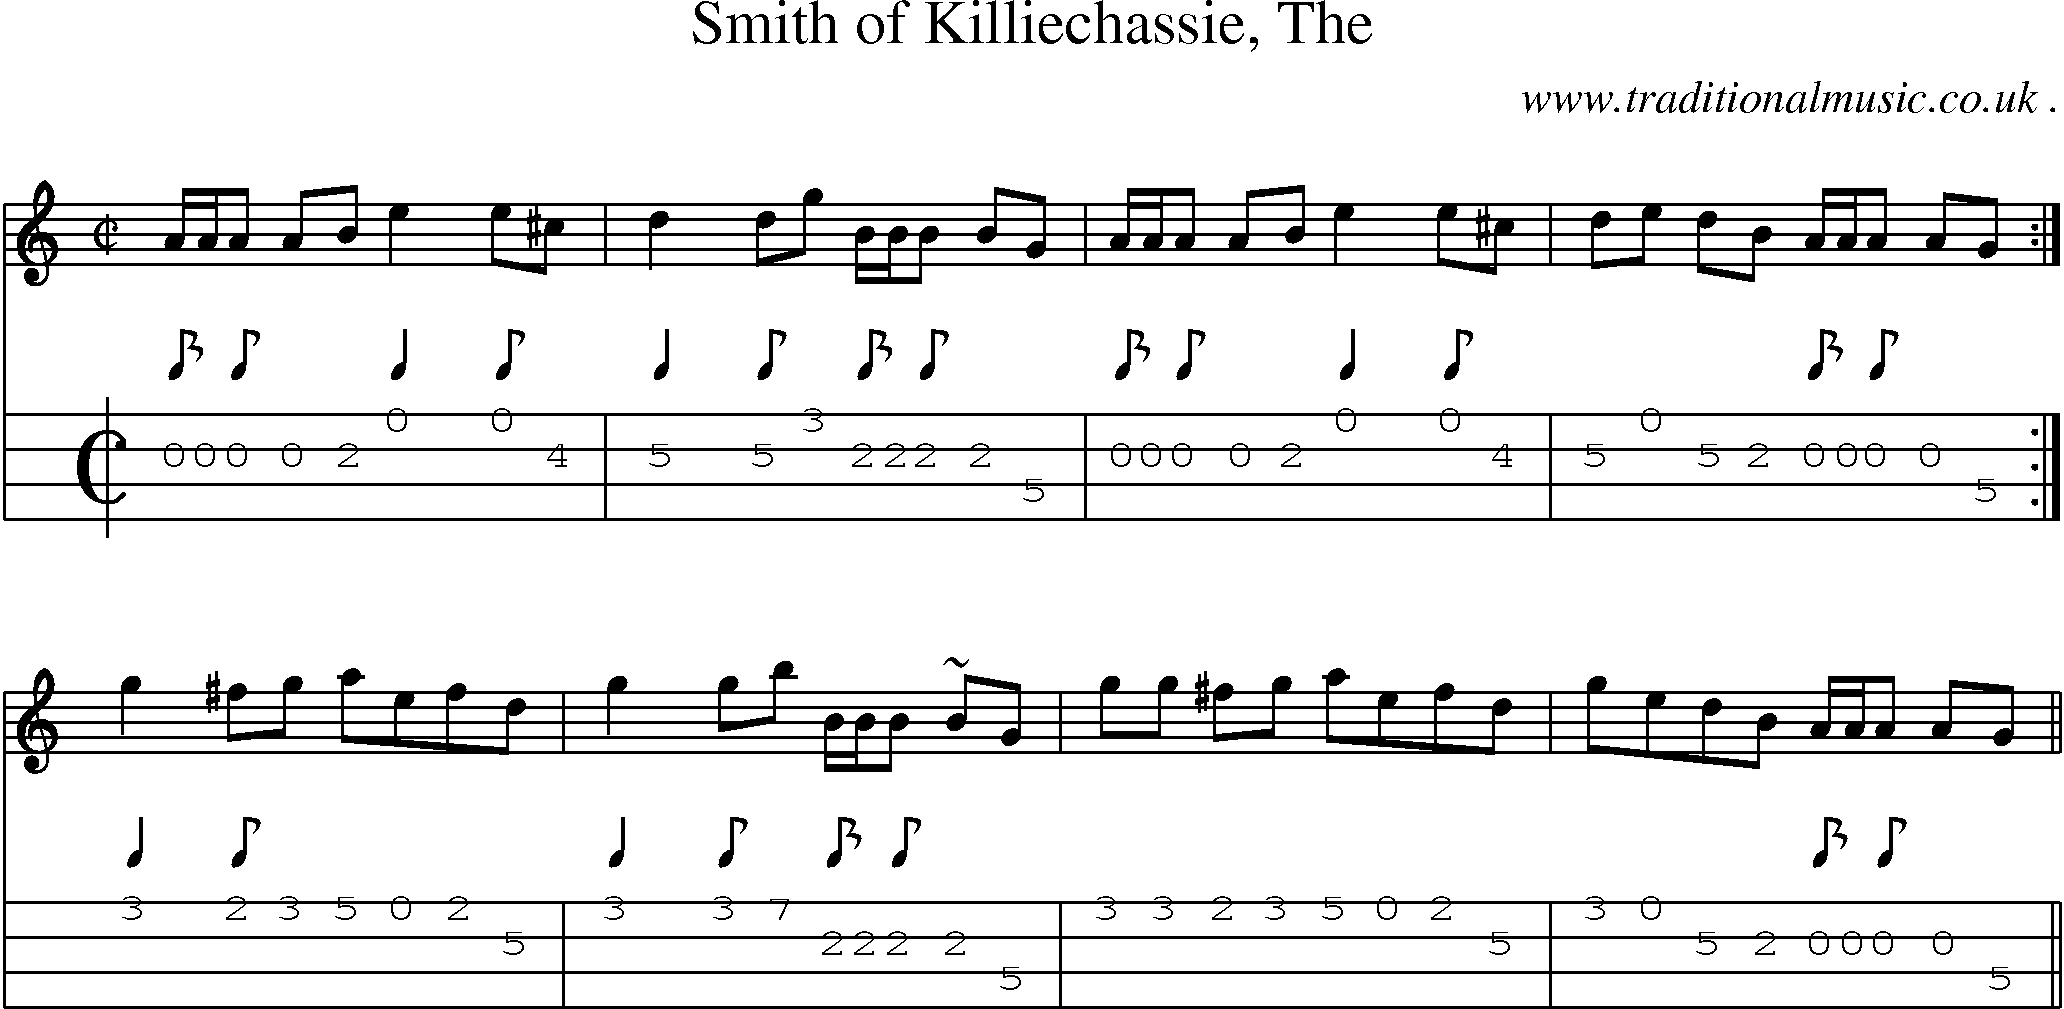 Sheet-music  score, Chords and Mandolin Tabs for Smith Of Killiechassie The